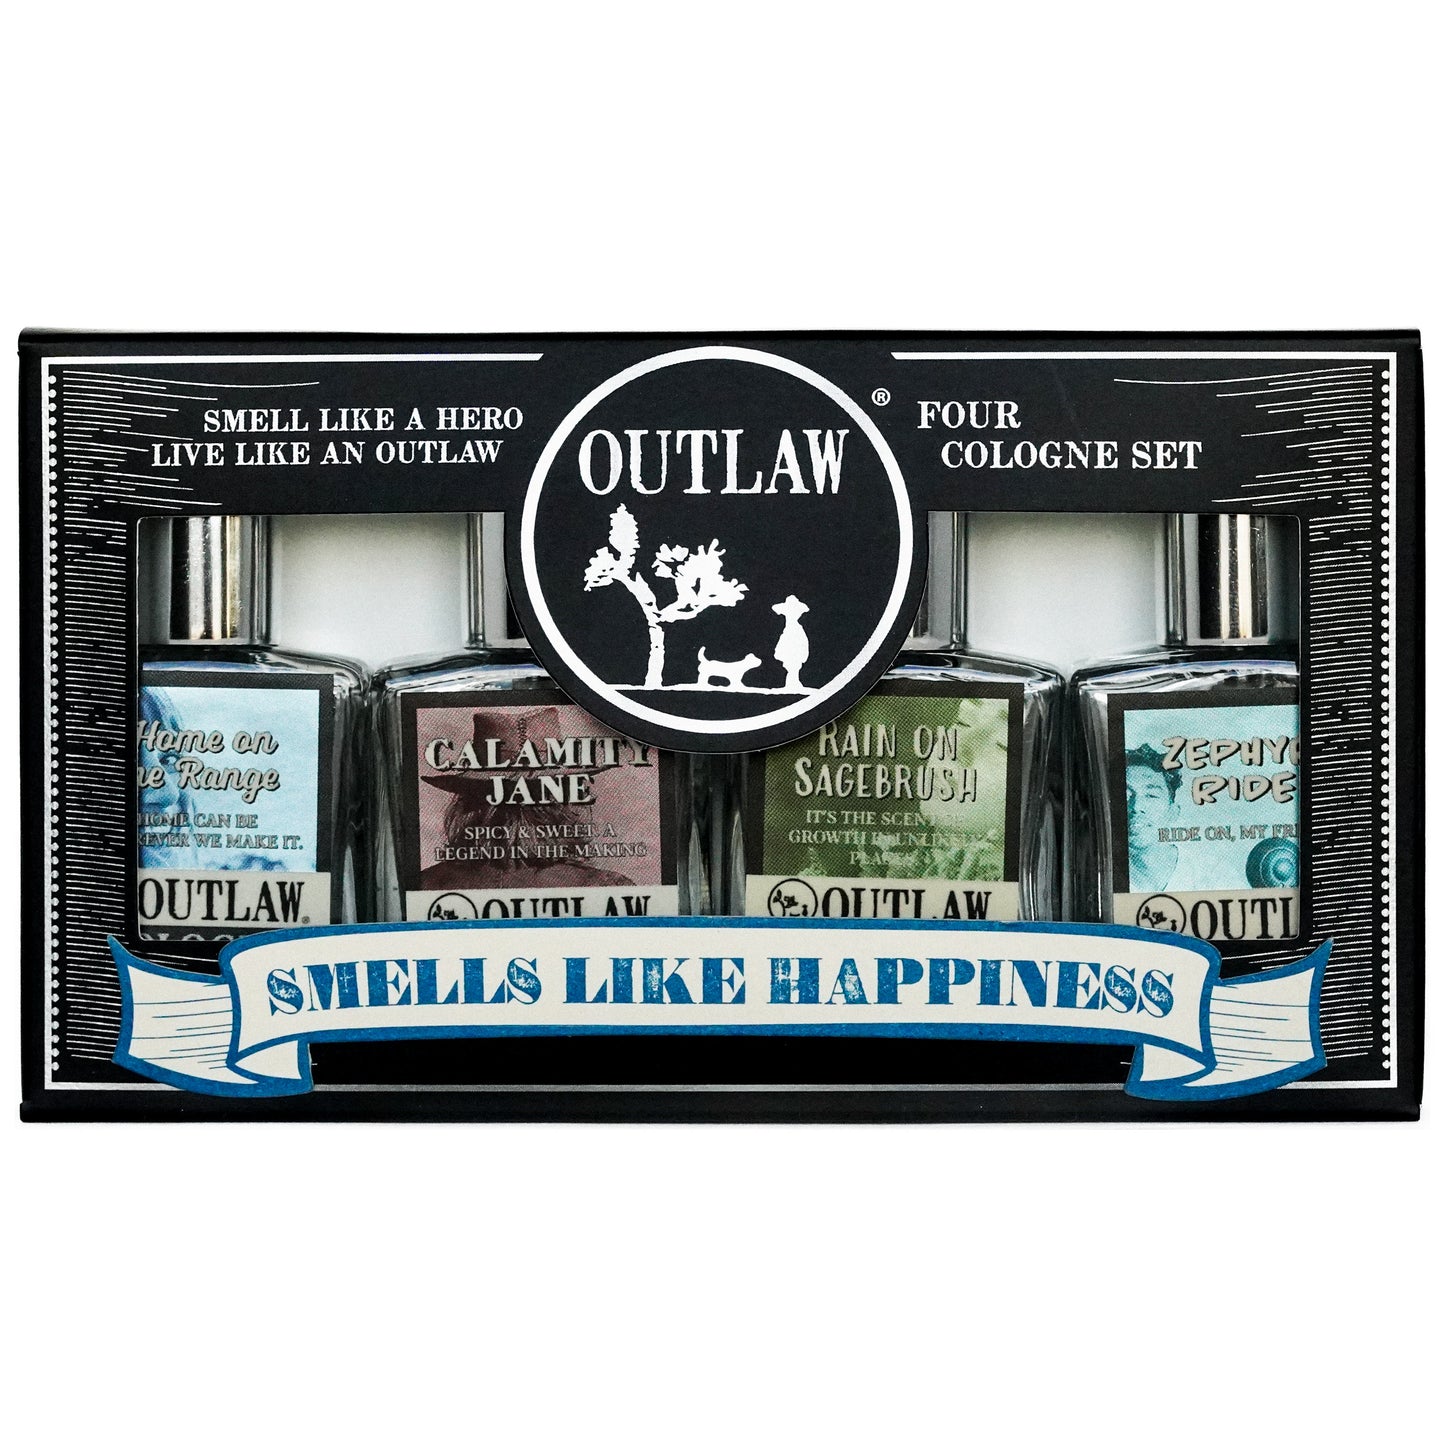 Outlaw Sample Cologne Set - A boxed set of 4 colognes to try